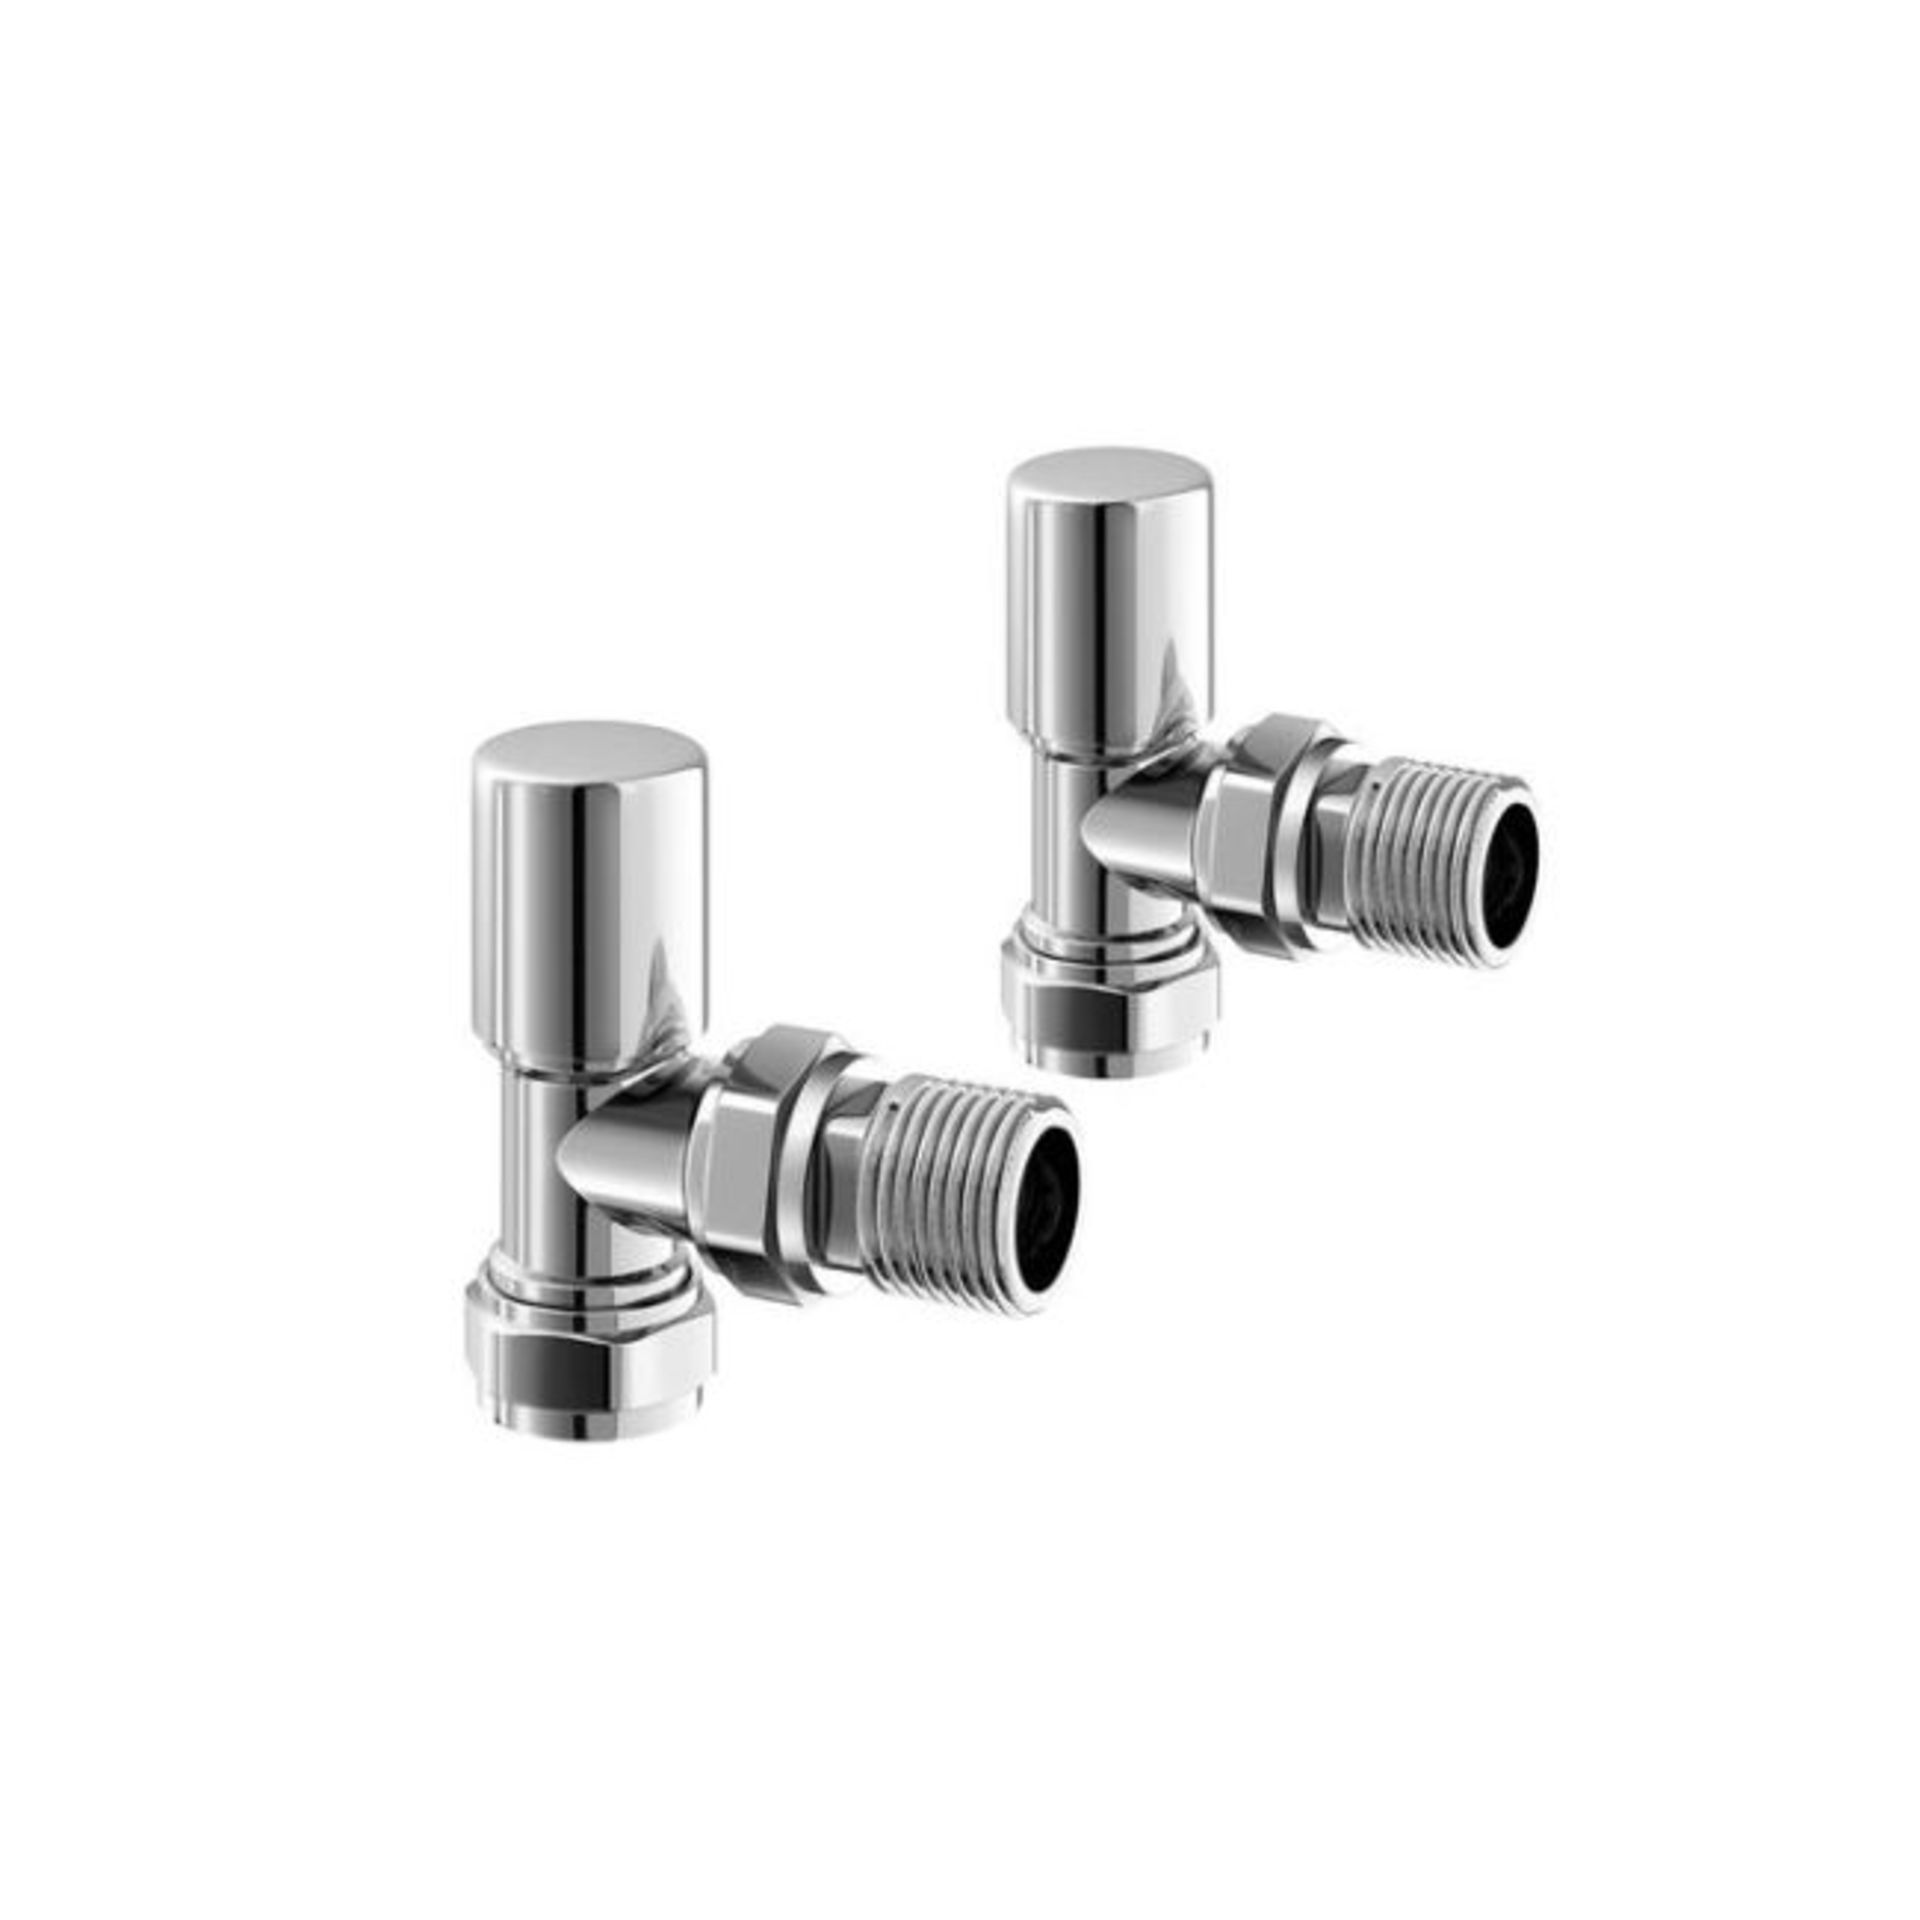 (SU1031) Standard 15mm Connection Angled Chrome Radiator Valves Chrome Plated Solid Brass Angle... - Image 2 of 2